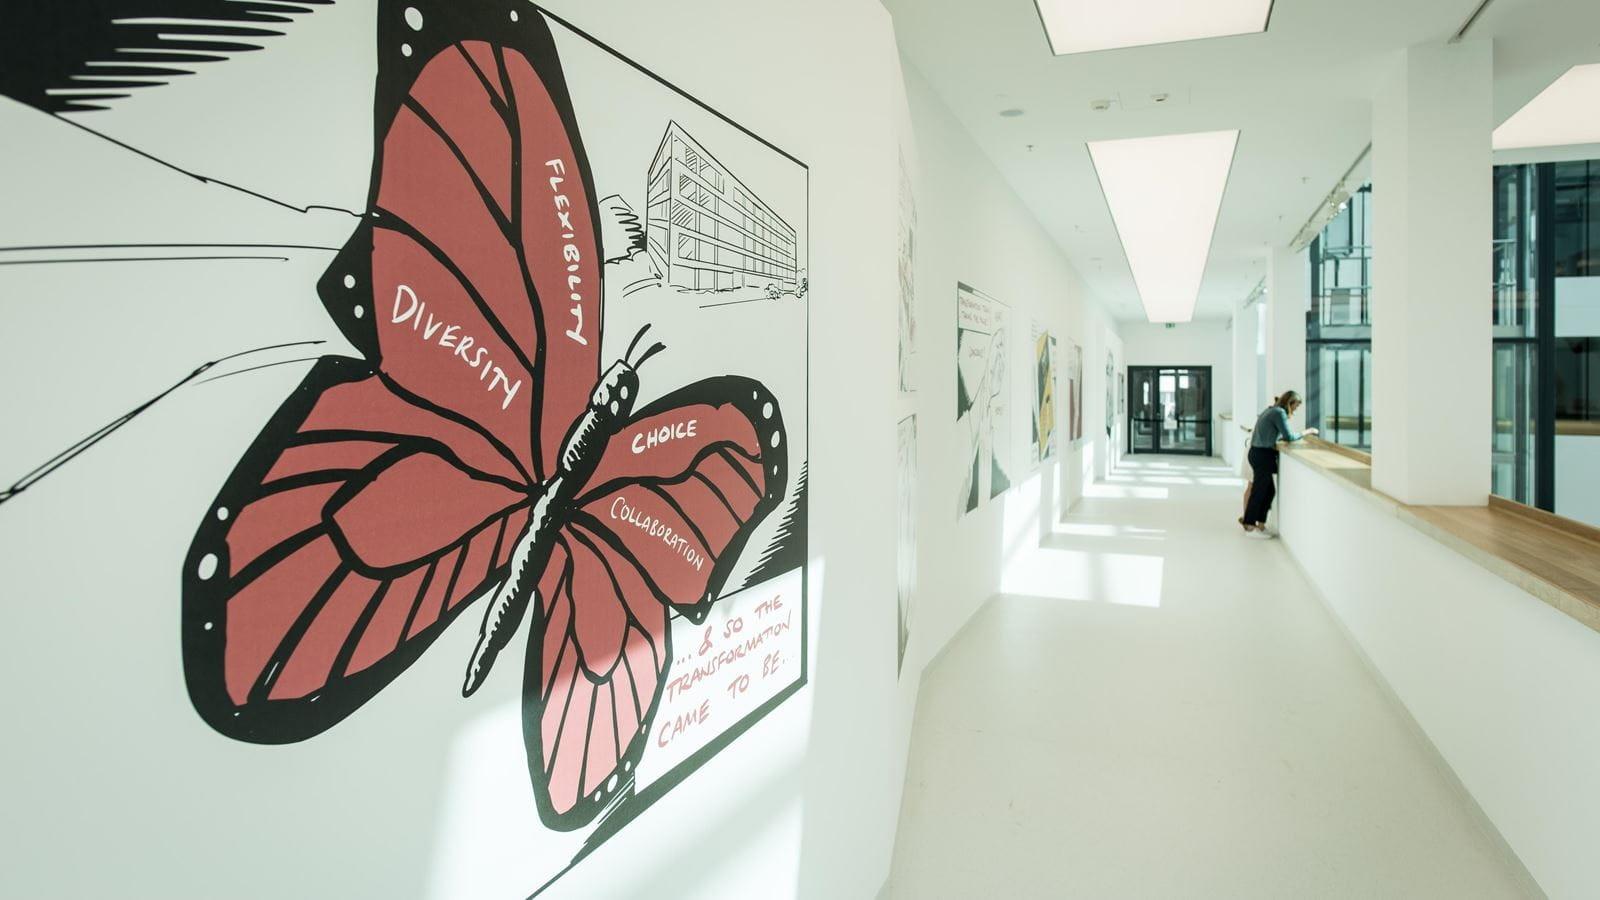 A butterfly illustration in the hallway of the M600 R&D building.